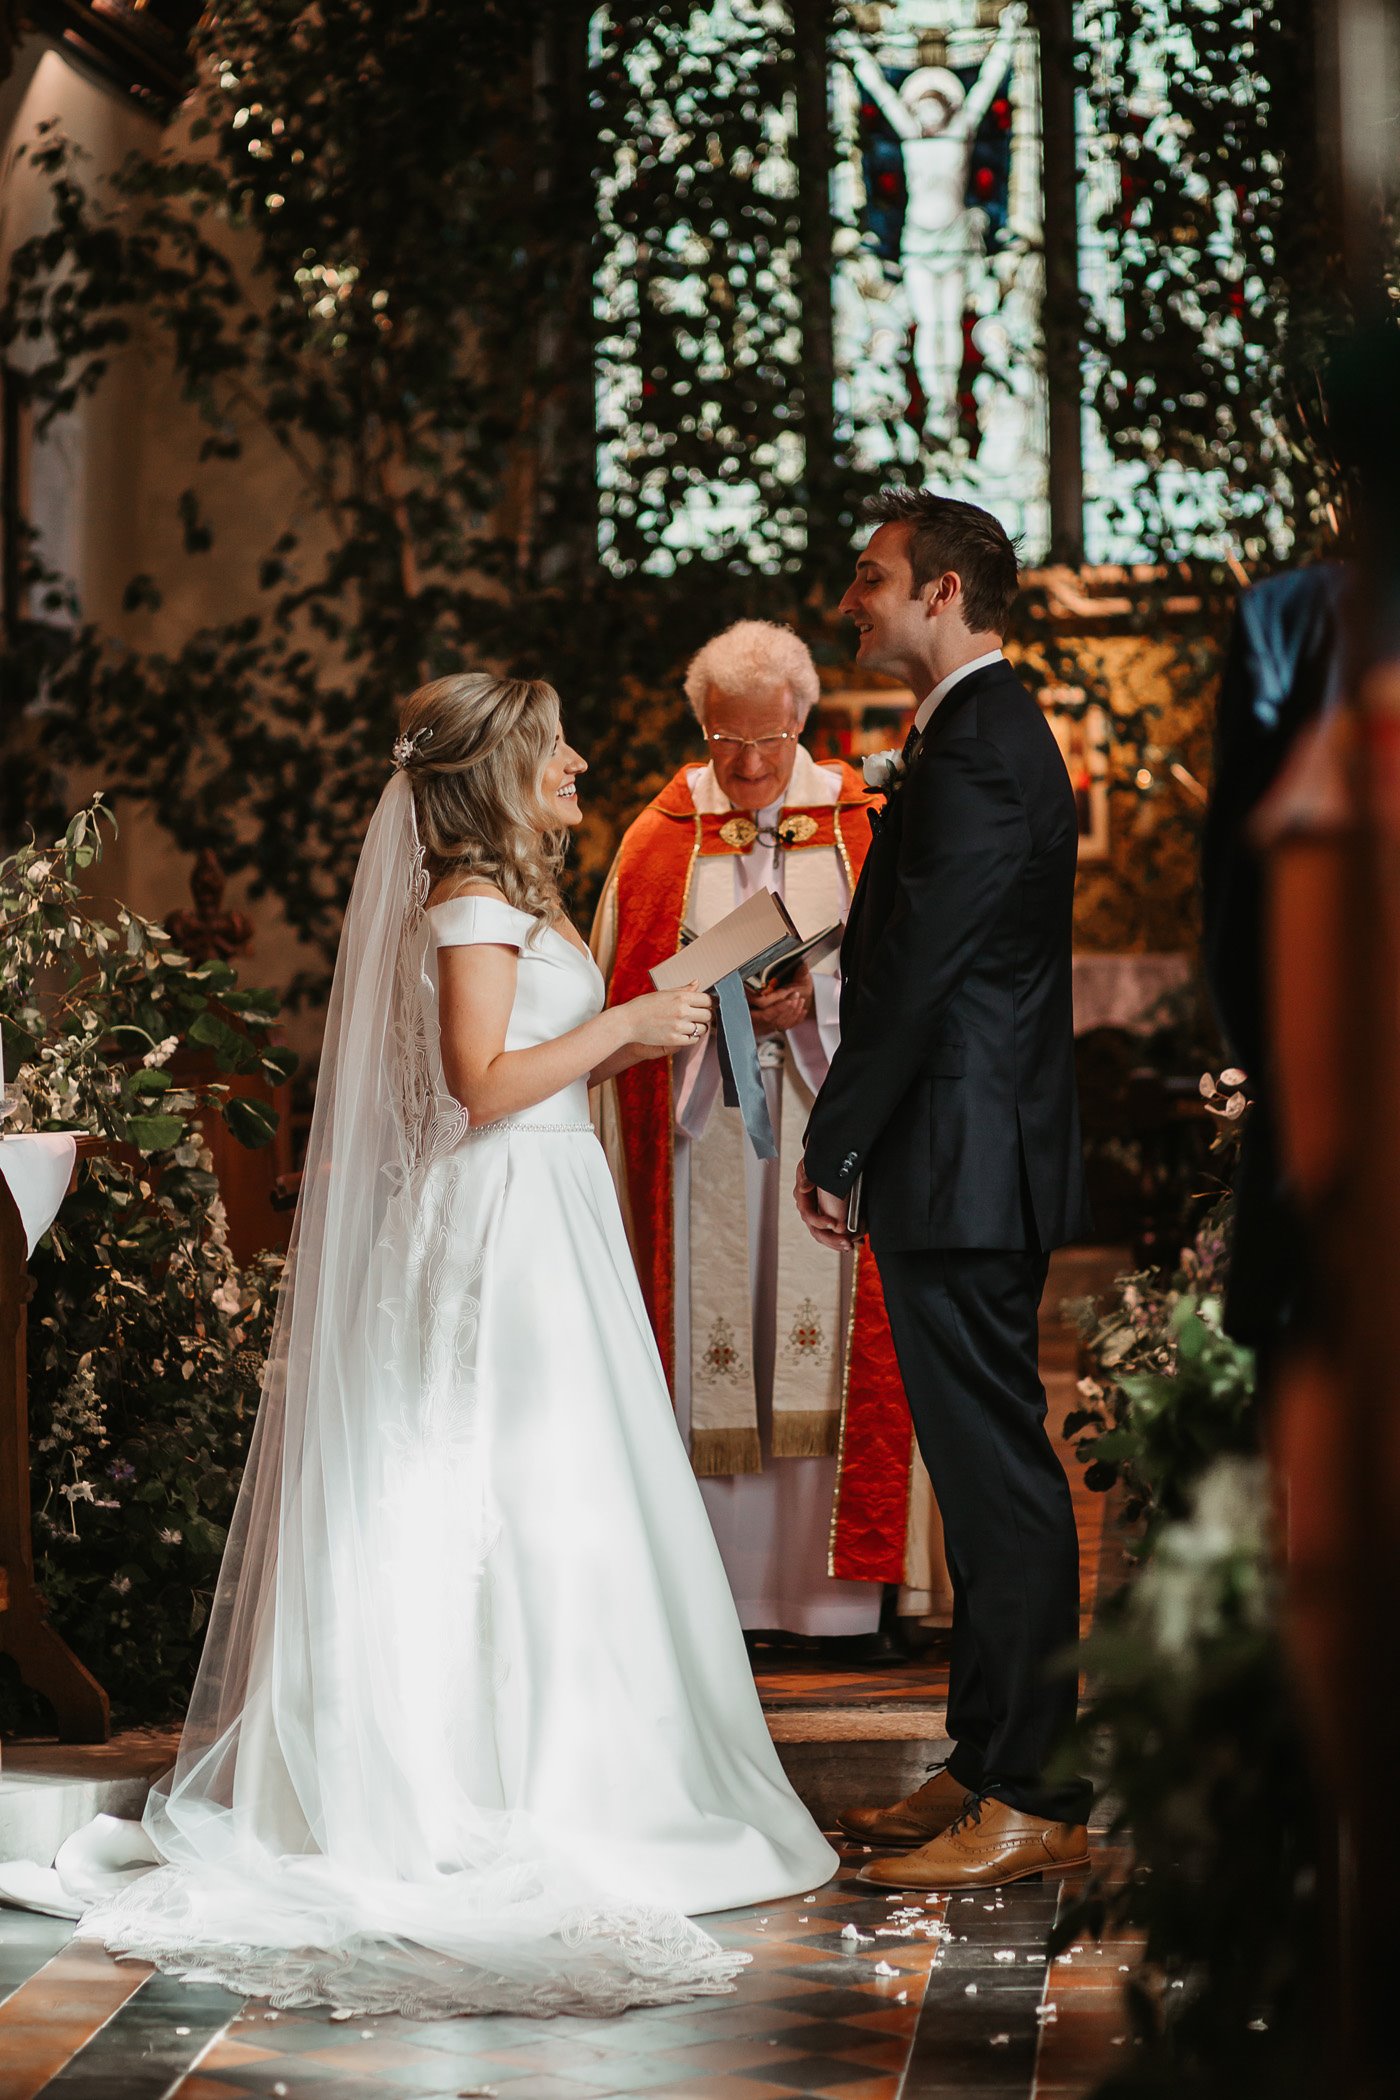 Religious ceremony in church Vicar behind couple who are smiling holding hands in church